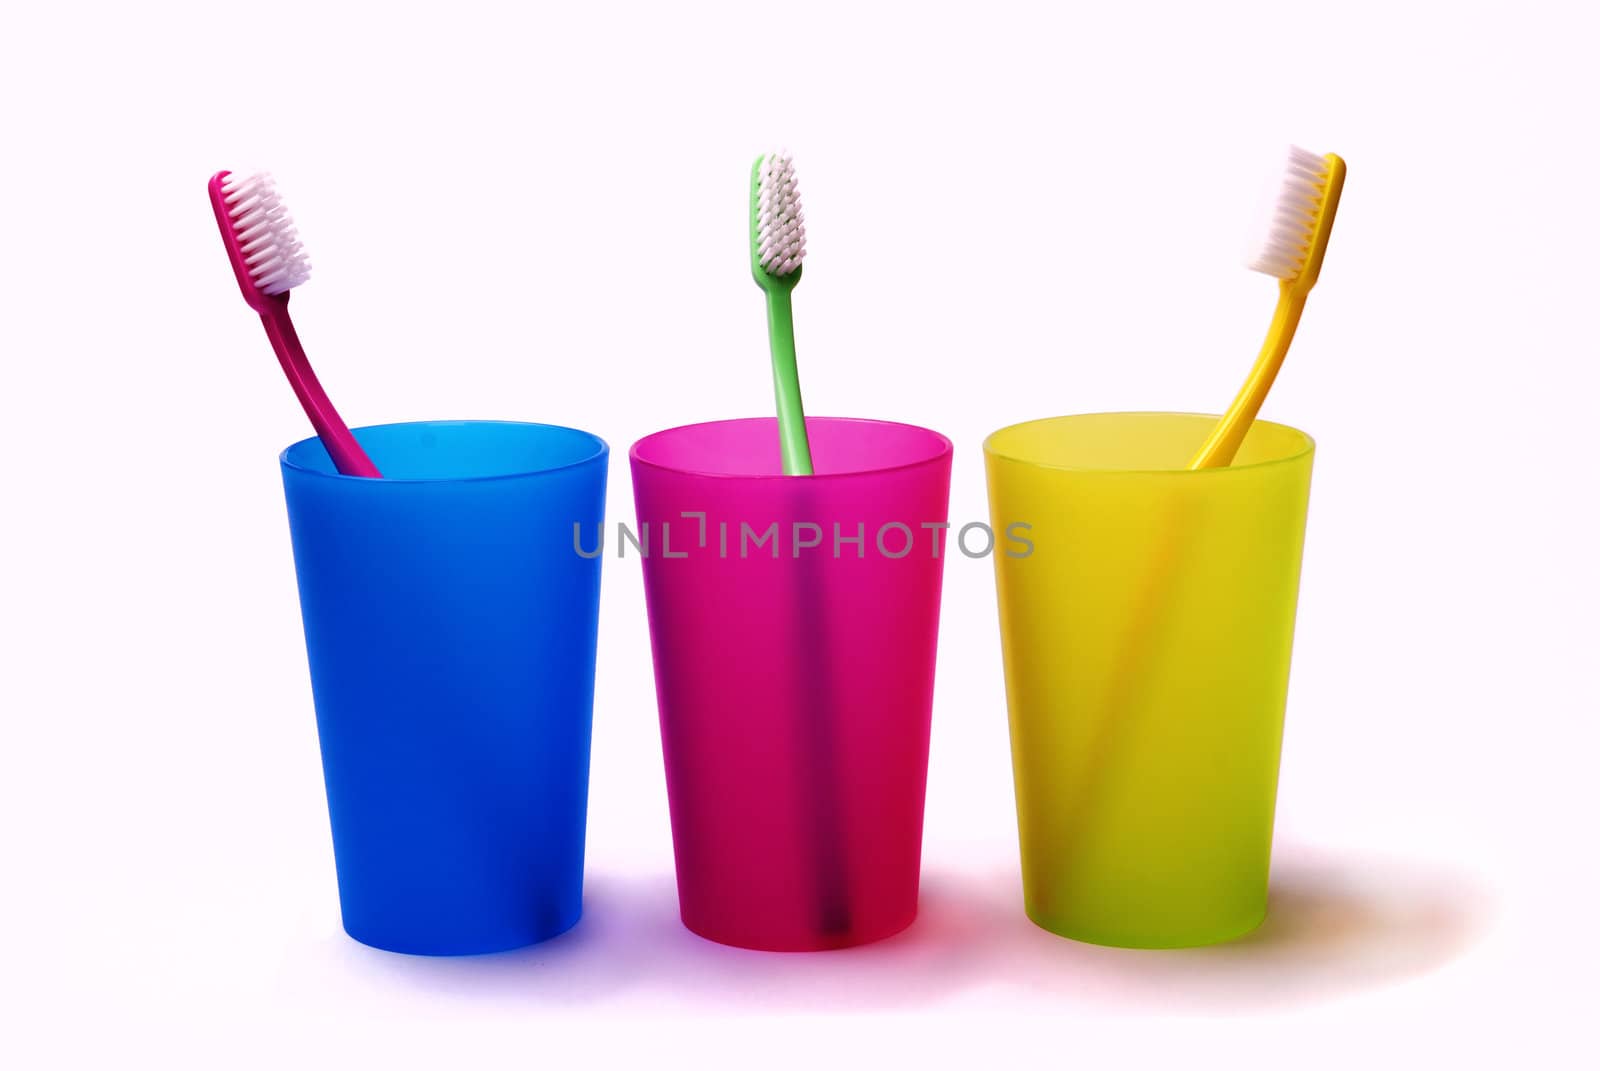 Toothbrushes in color holders